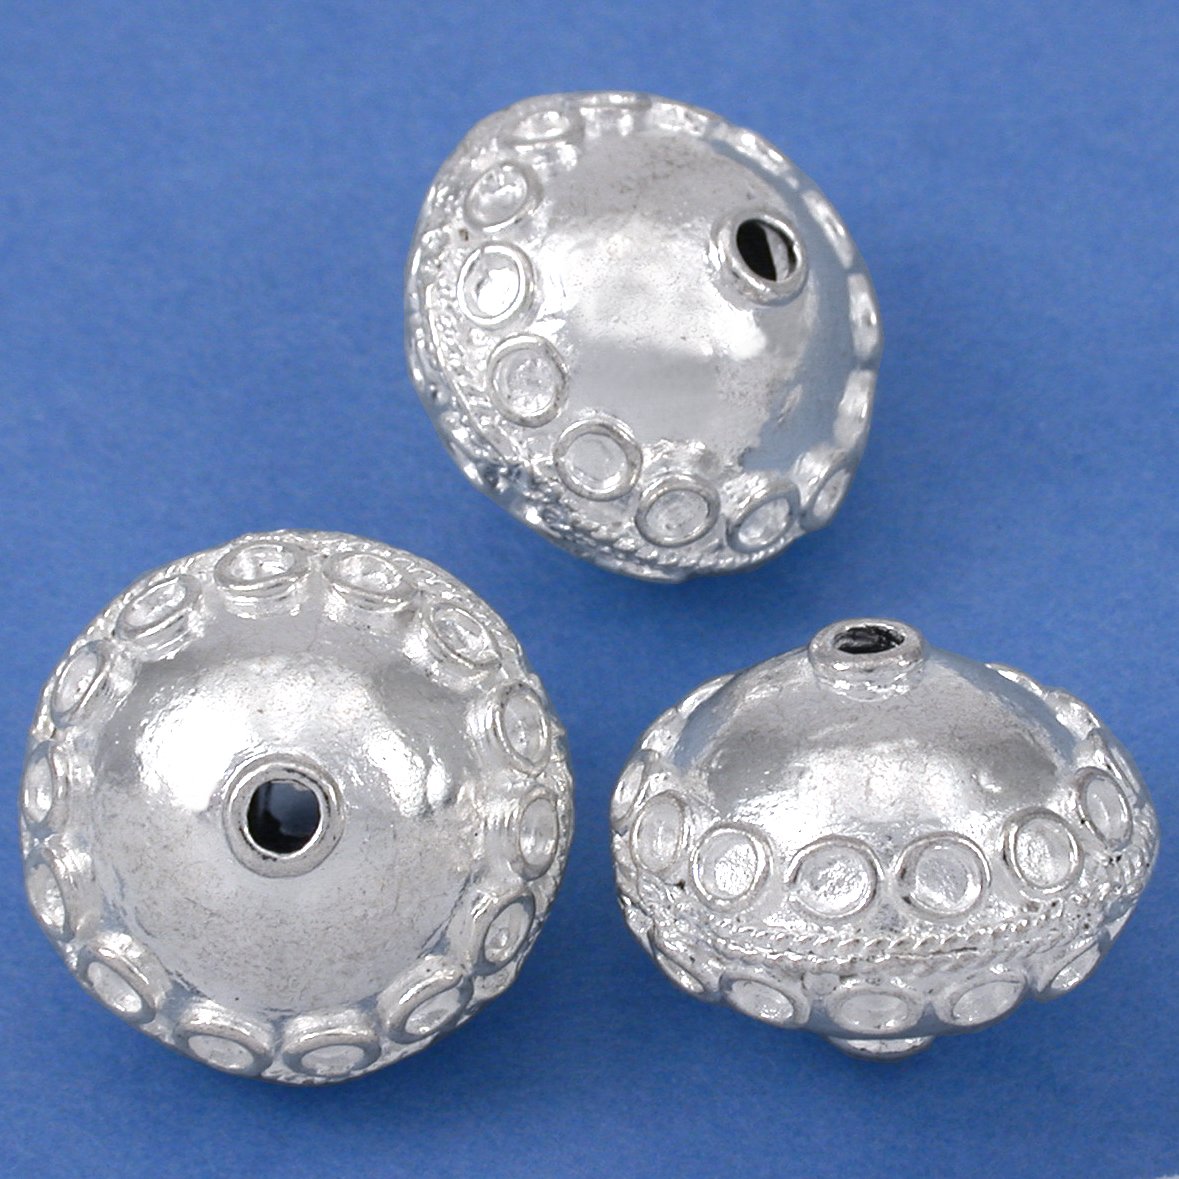 Bali Saucer Silver Plated Beads 17.5mm 2Pcs Approx.